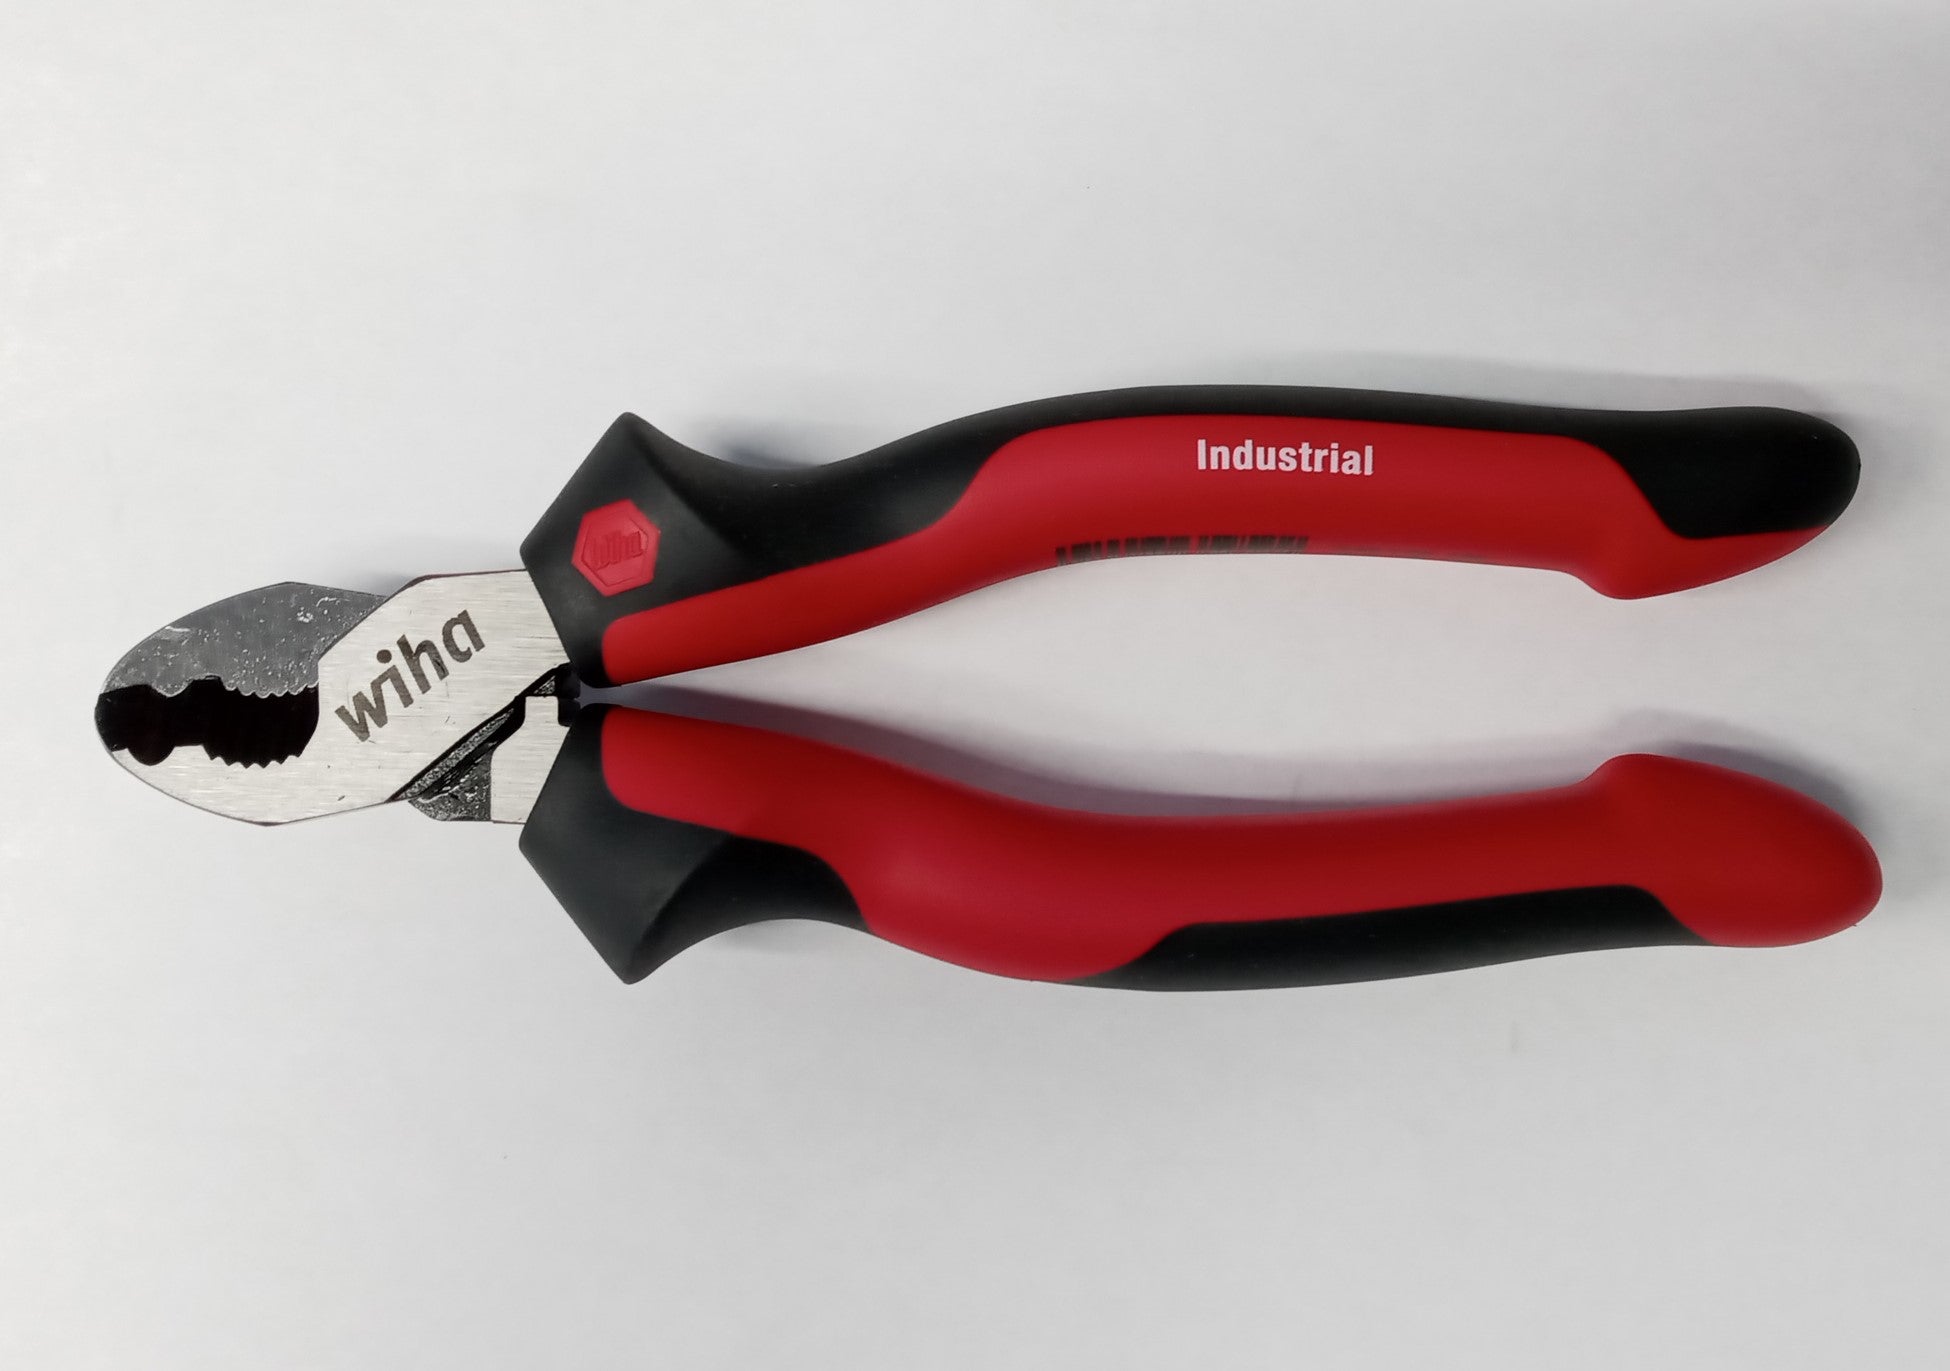 Wiha 30926 INDUSTRIAL CUSHION GRIP SERRATED CABLE CUTTERS 6.75" Germany